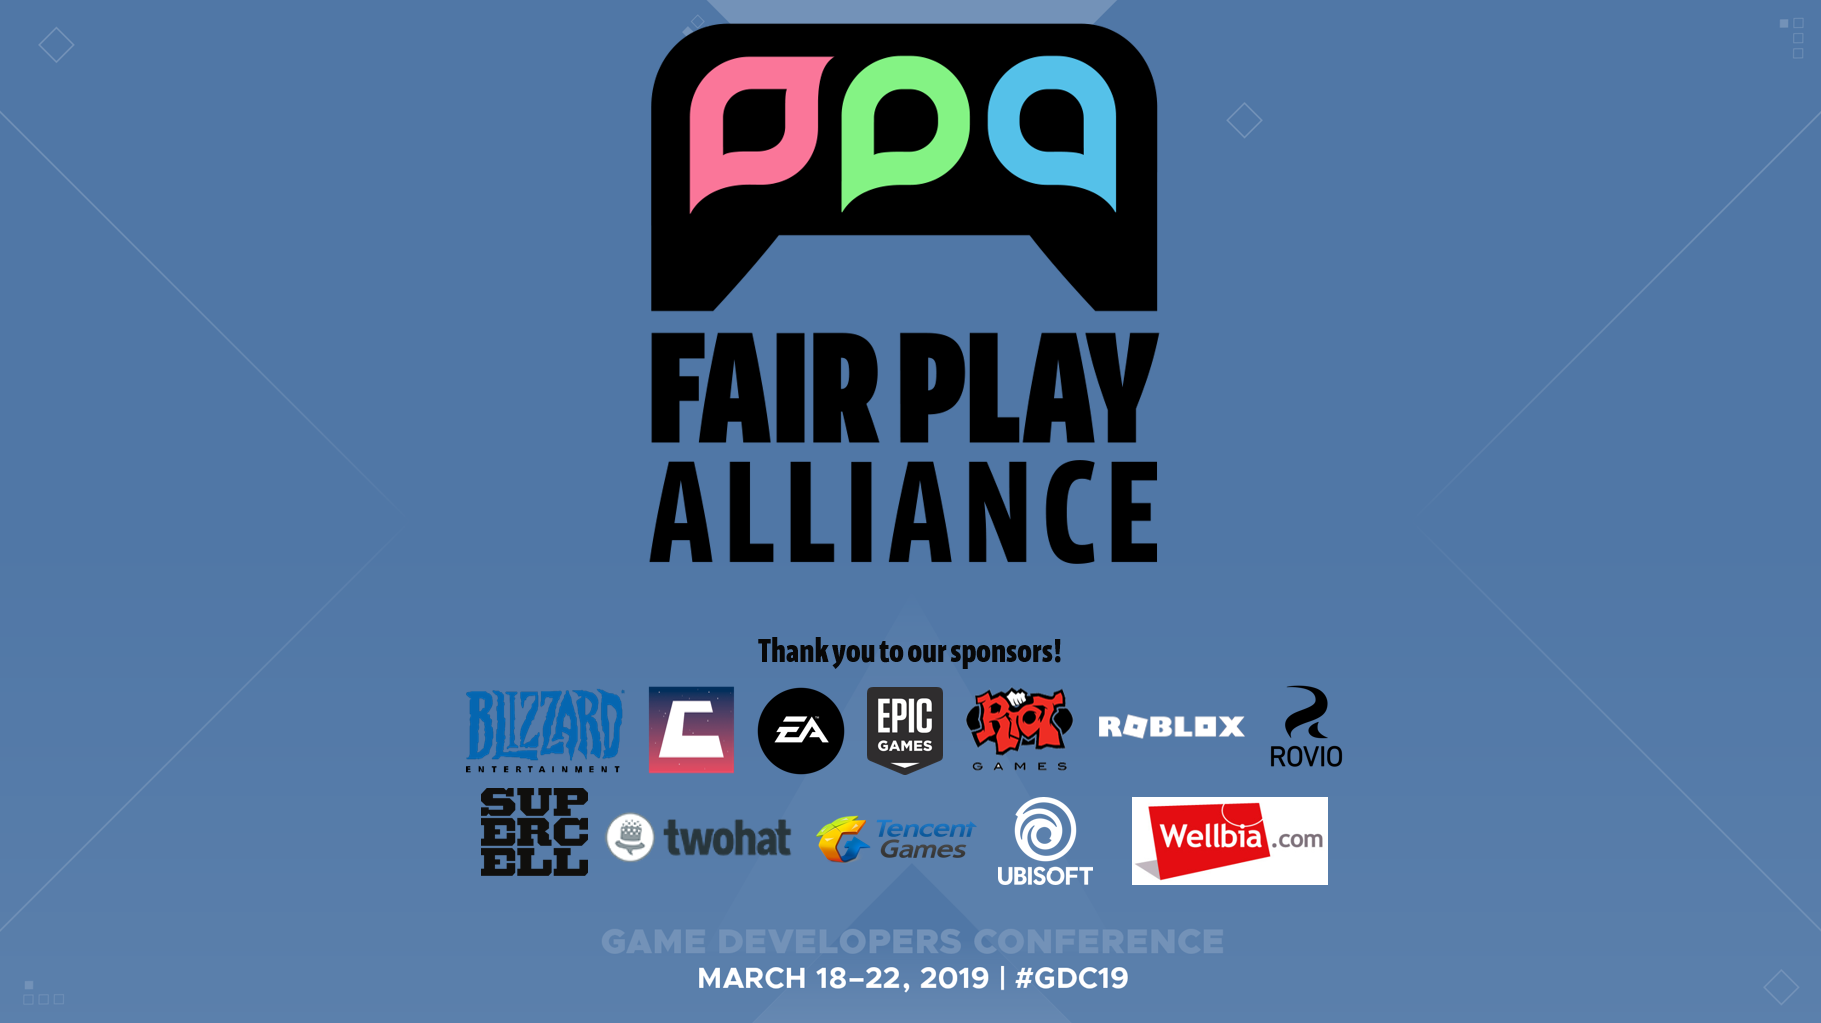 Impact Of Social Systems And Game Design On Player Interactions Gdc 2019 Fair Play Alliance - roblox.com player